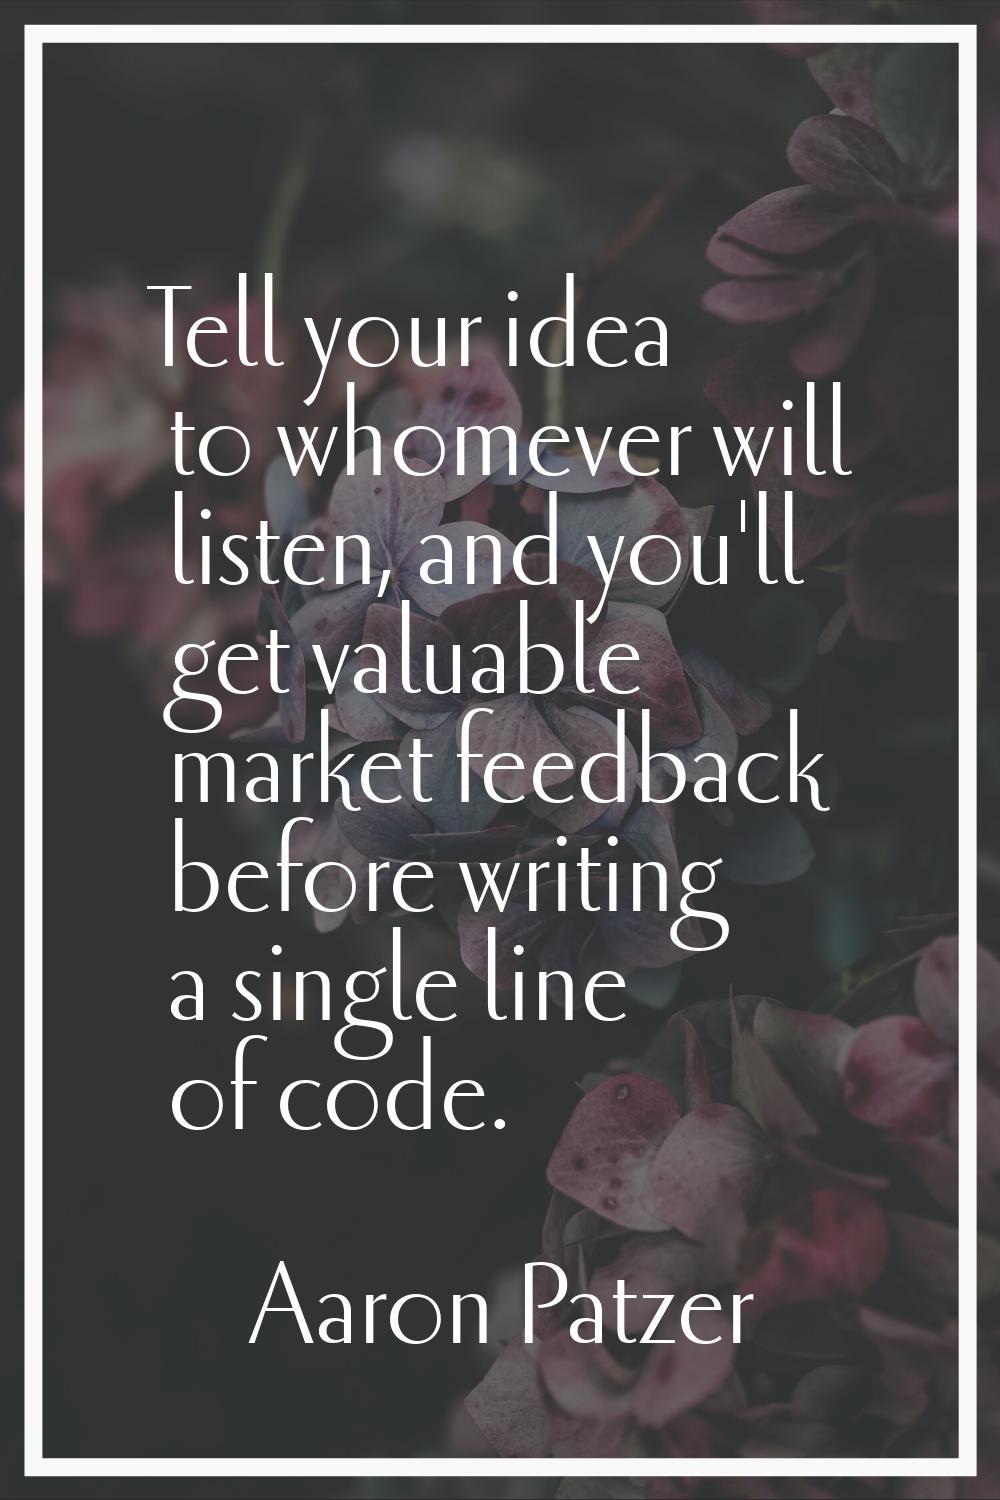 Tell your idea to whomever will listen, and you'll get valuable market feedback before writing a si